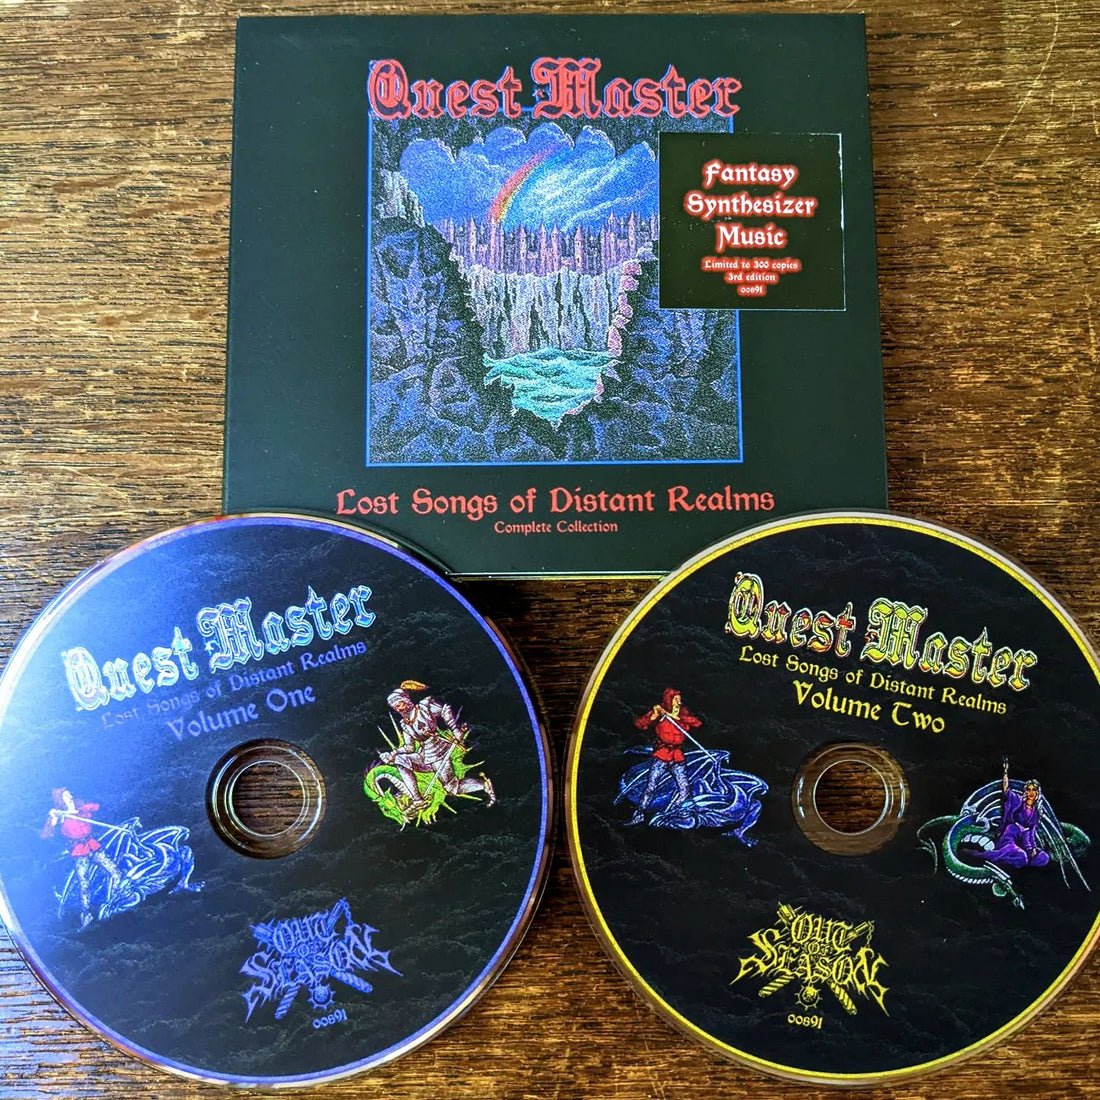 QUEST MASTER "Lost Songs of Distant Realms" 2xCD digipak is now back in stock!